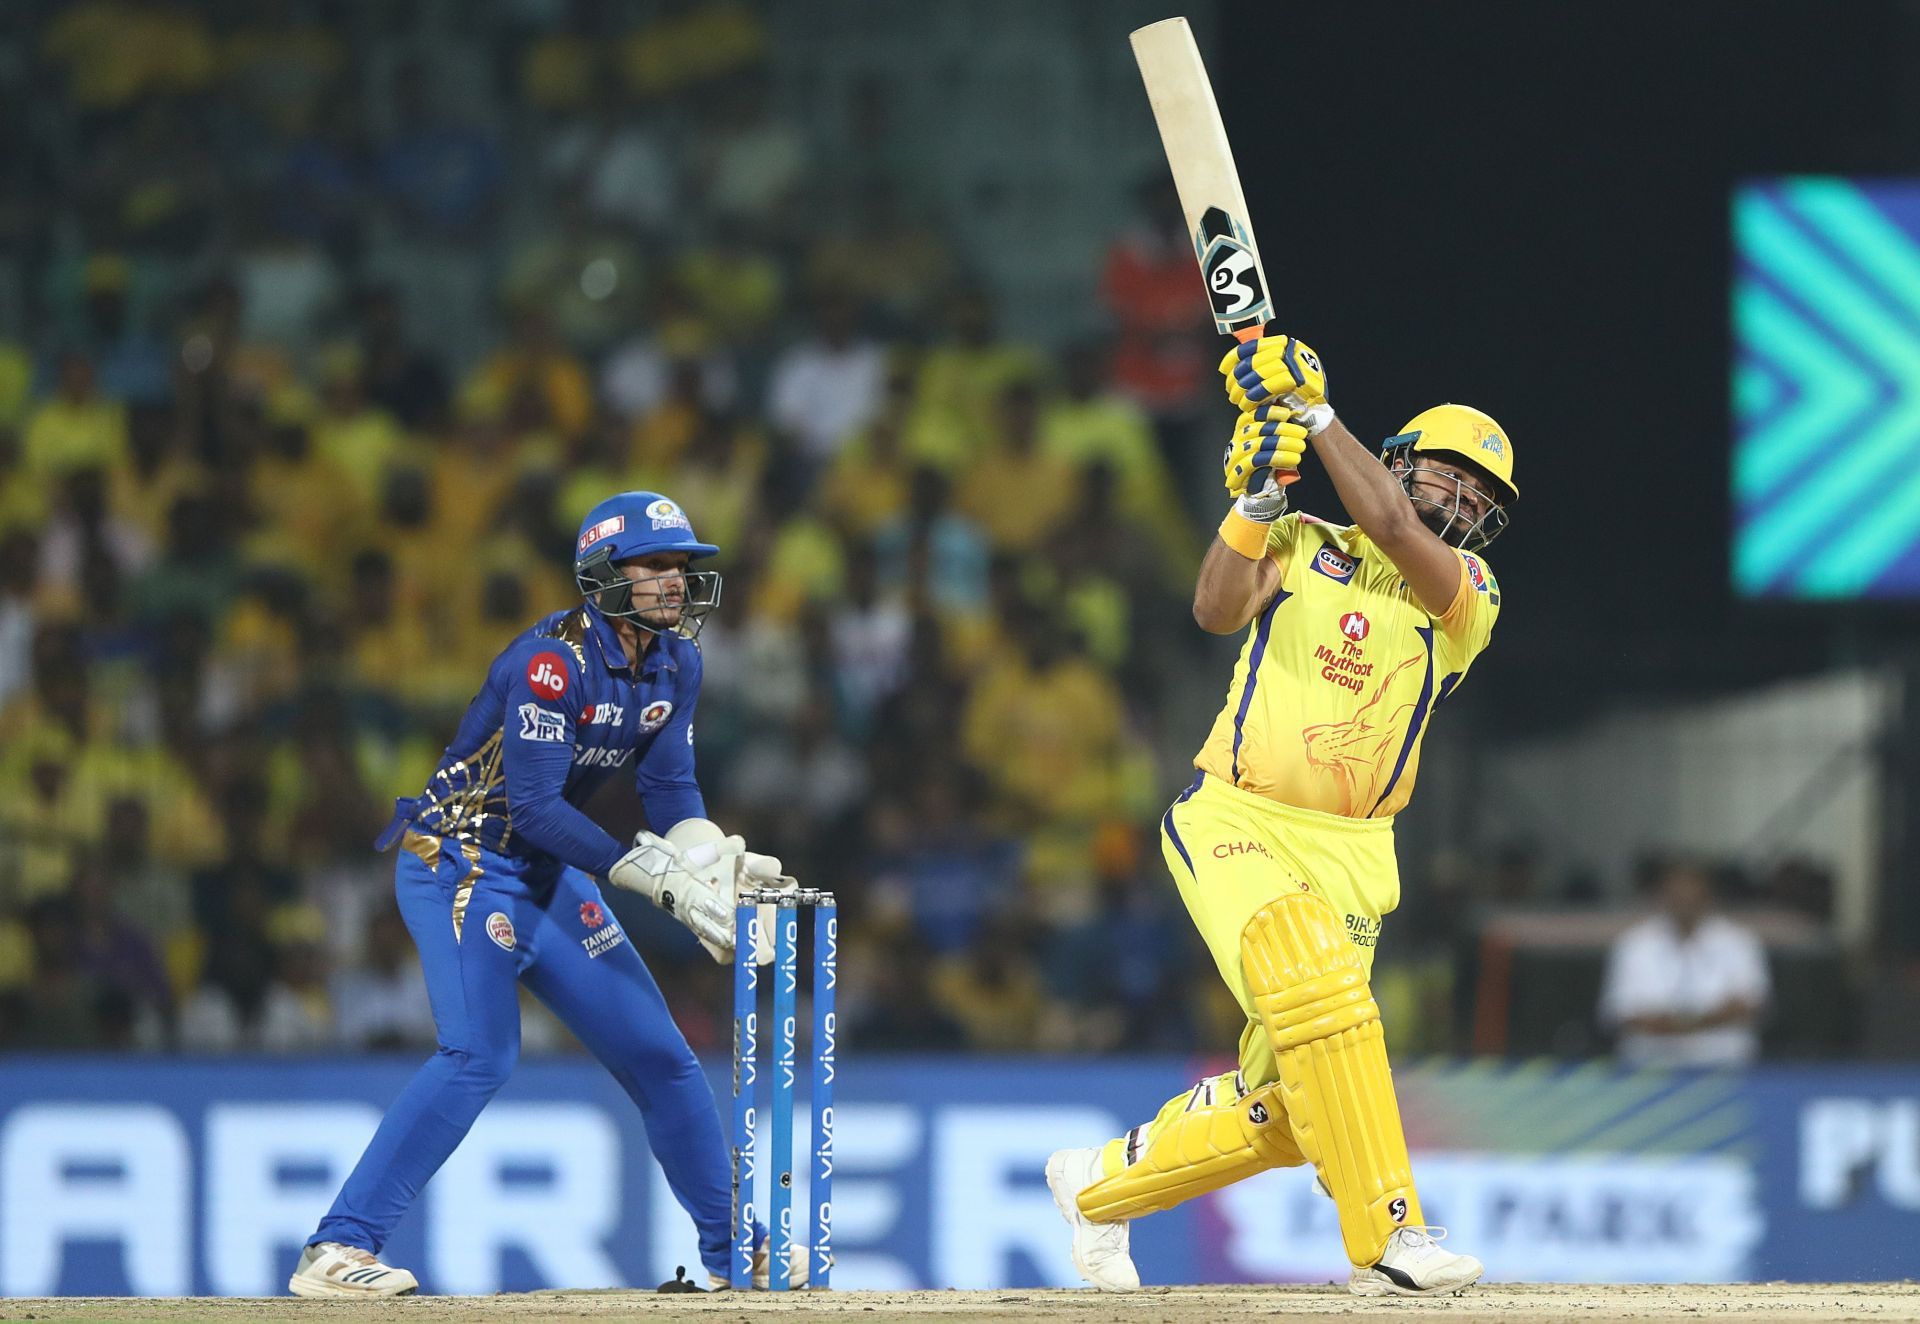 Suresh Raina has captained the Chennai Super Kings in IPL. (Image: Getty)